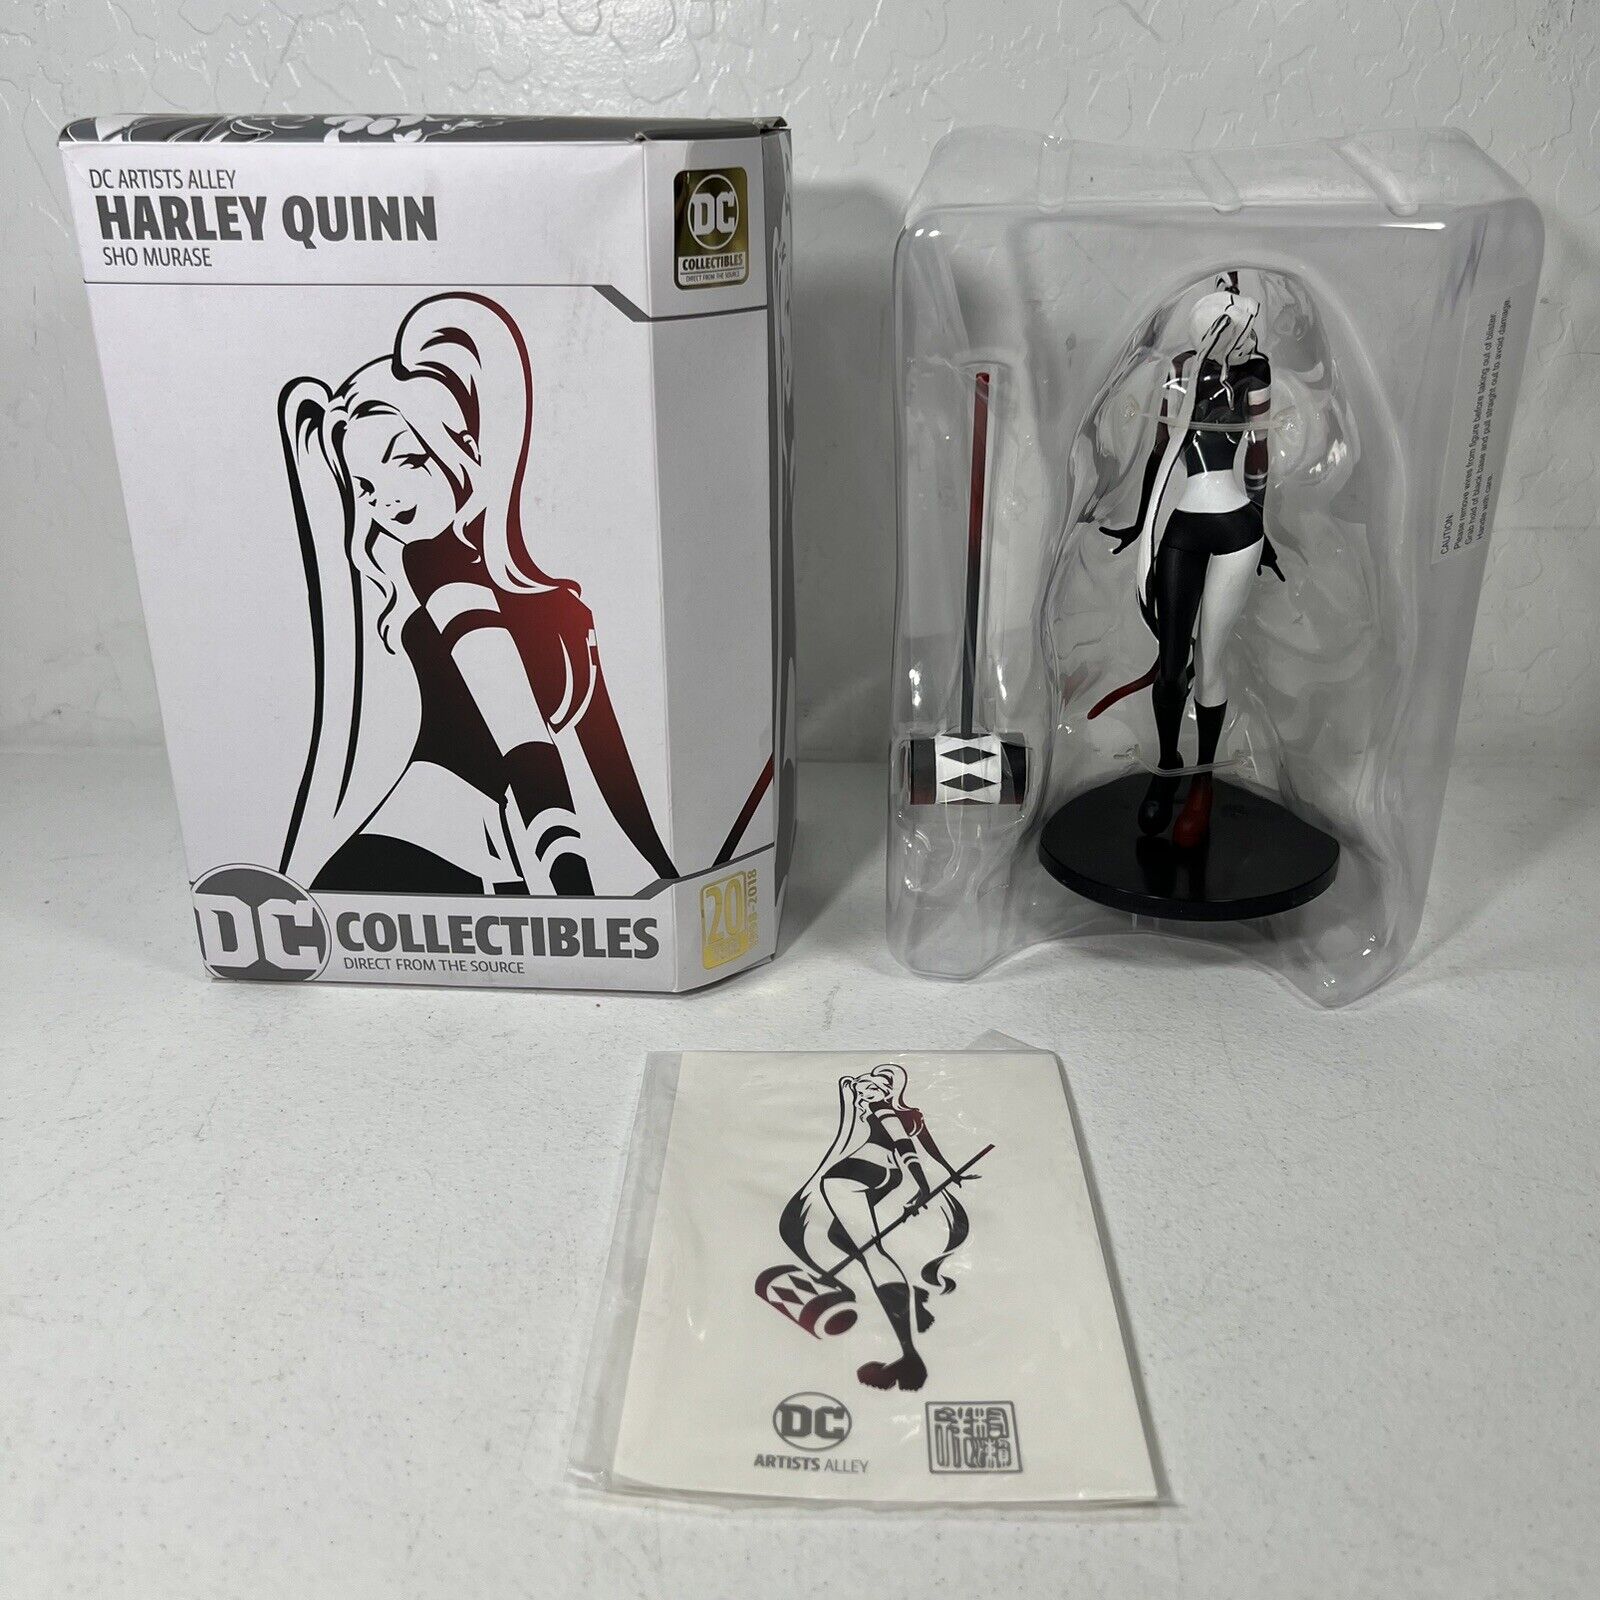 DC Collectibles Artists Alley Harley Quinn Standard Edition Statue by Sho Murase